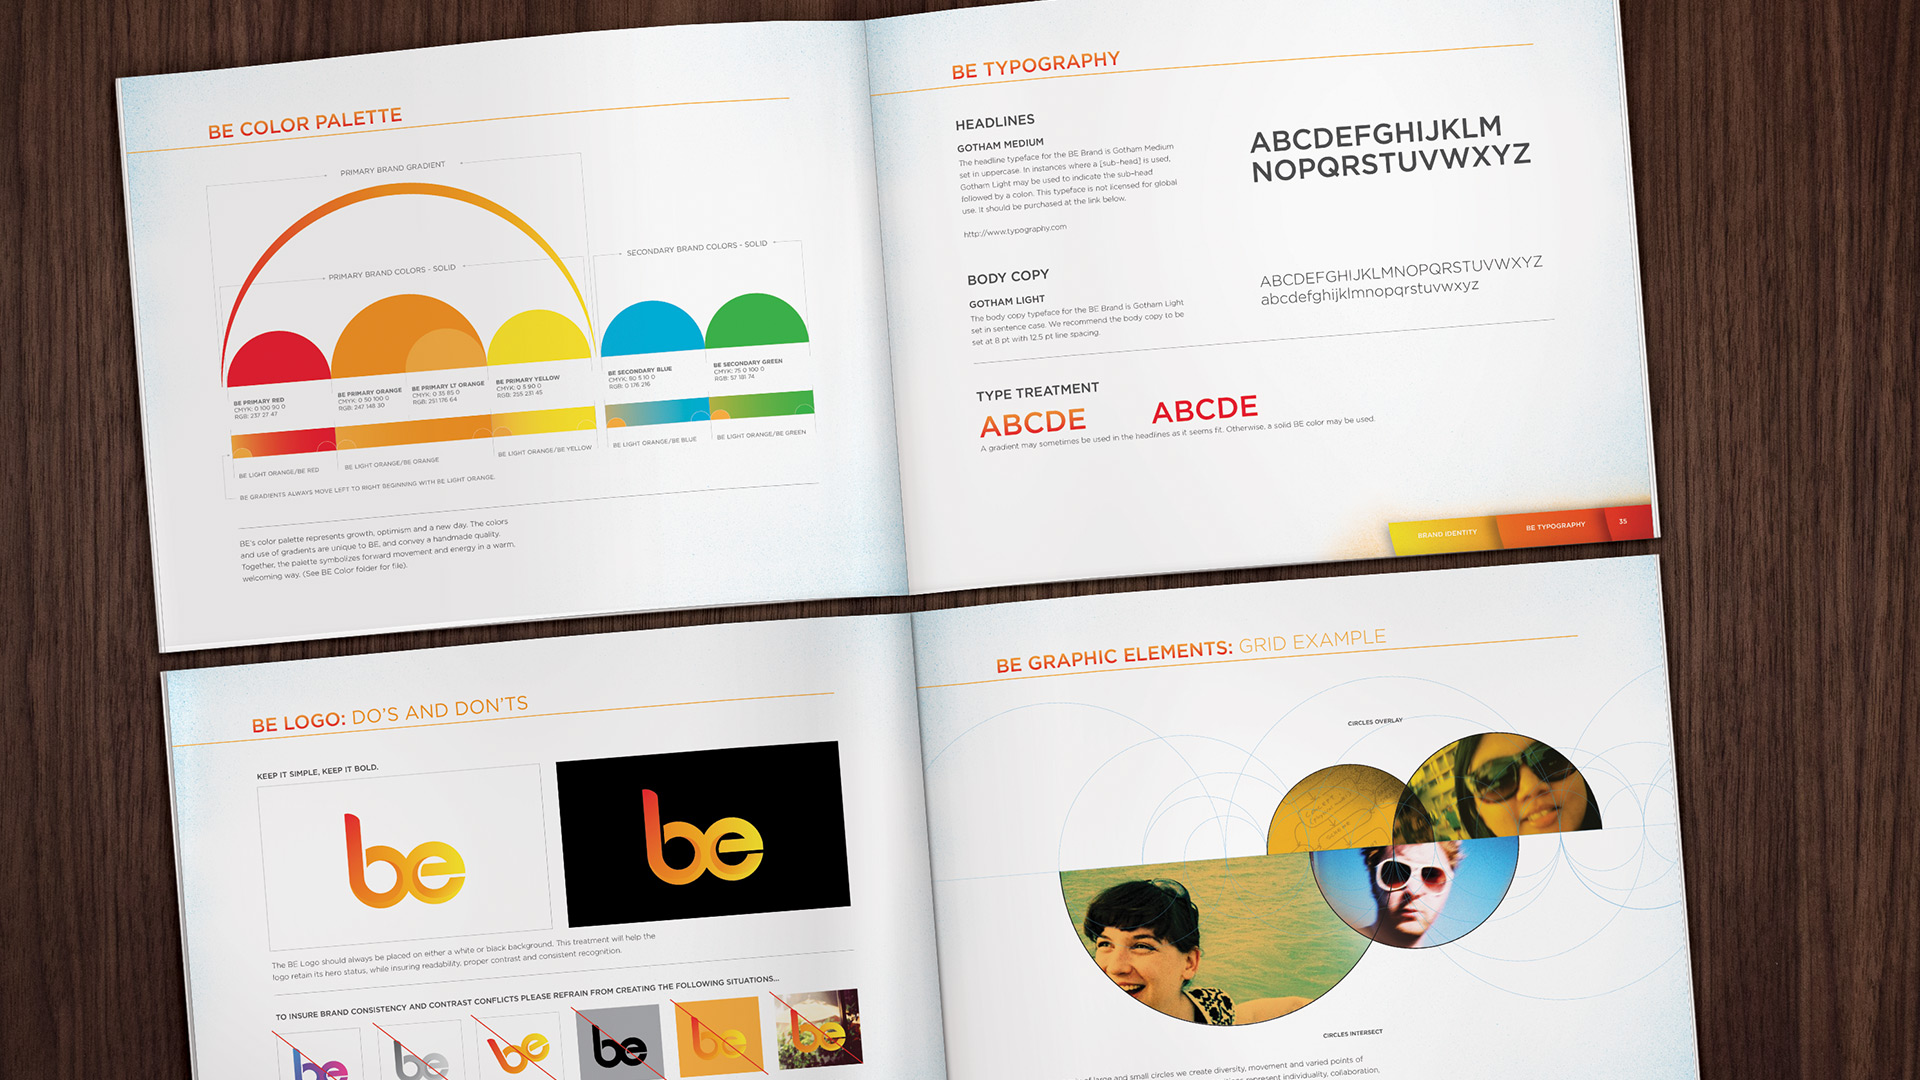 Brand style guide created for Be Experience by Incubate Design